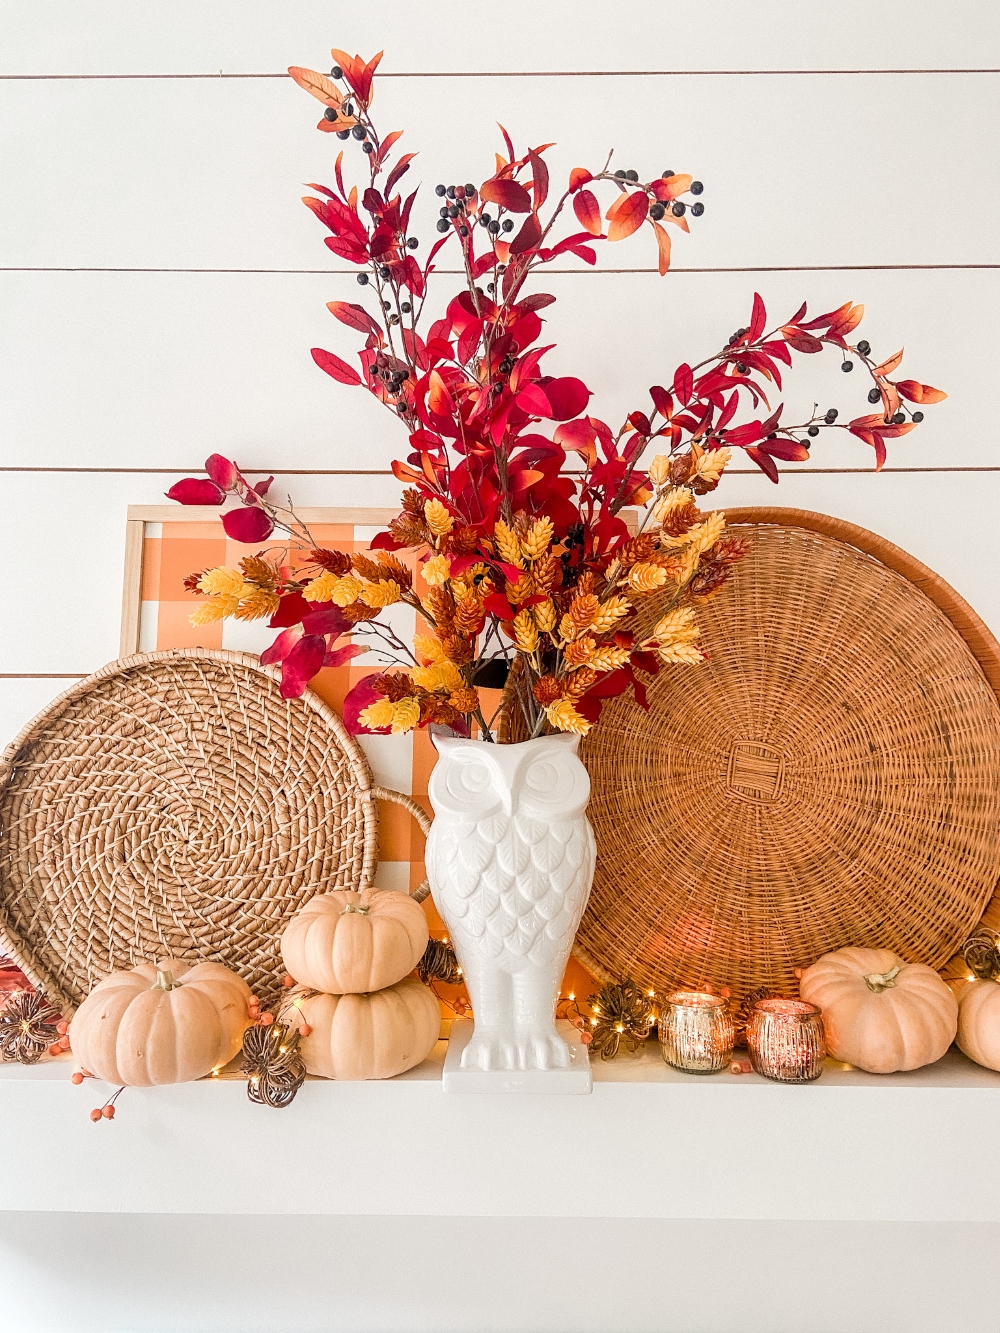 Boho Cottage Easy Fall Mantel Ideas. Create a earthy, textured mantel using items you already have! 